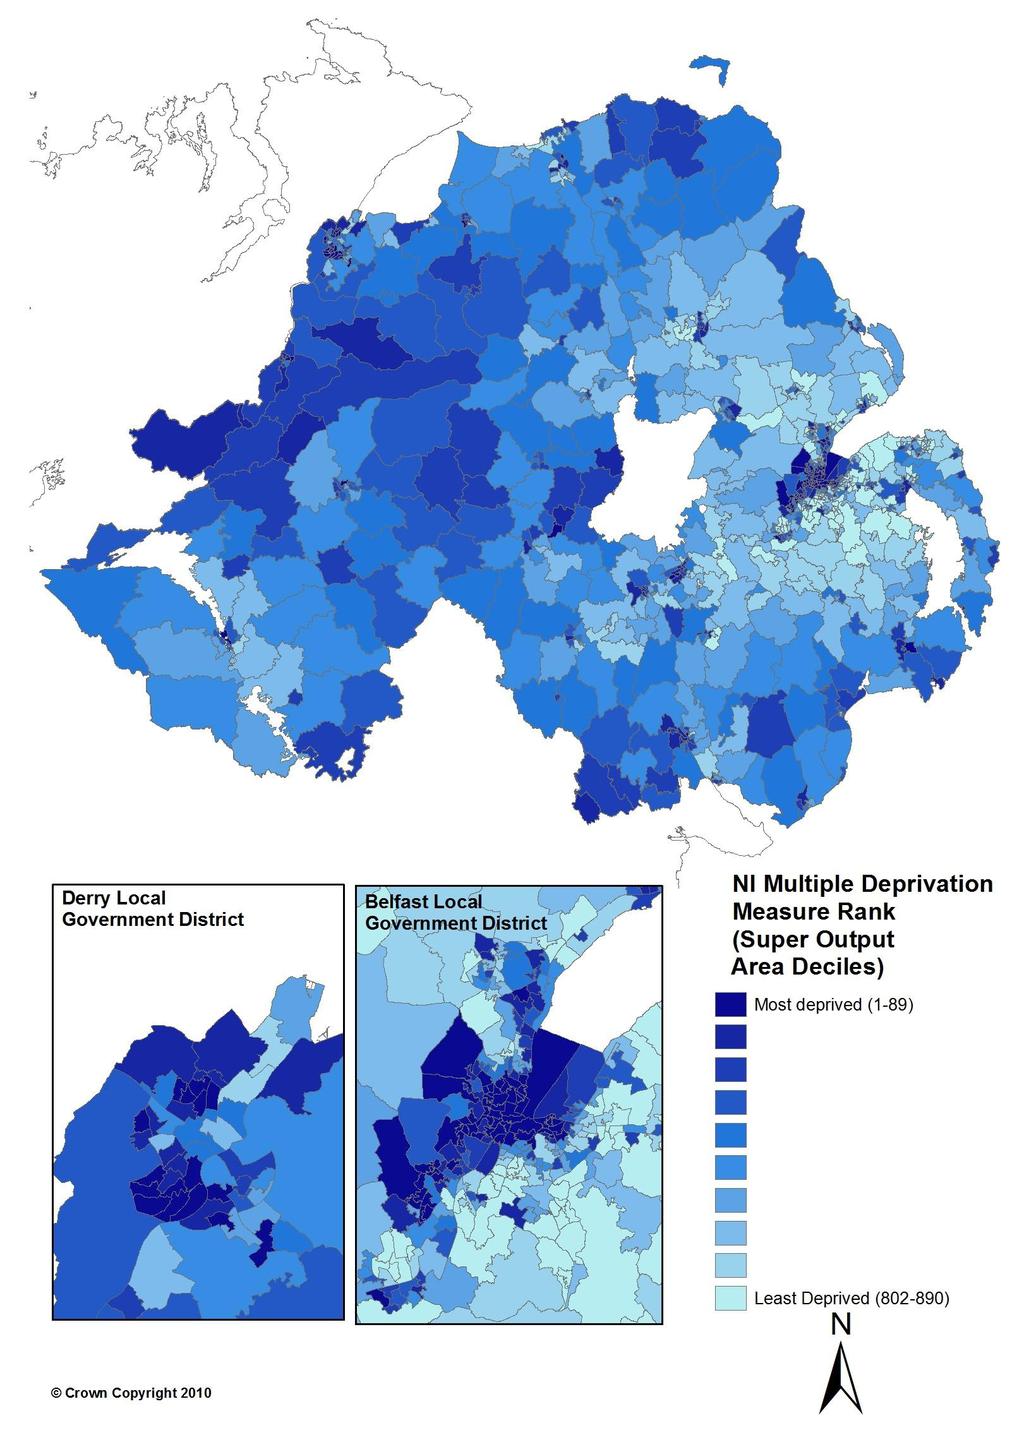 Figure A illustrates the relative levels of deprivation within NI in 2010.